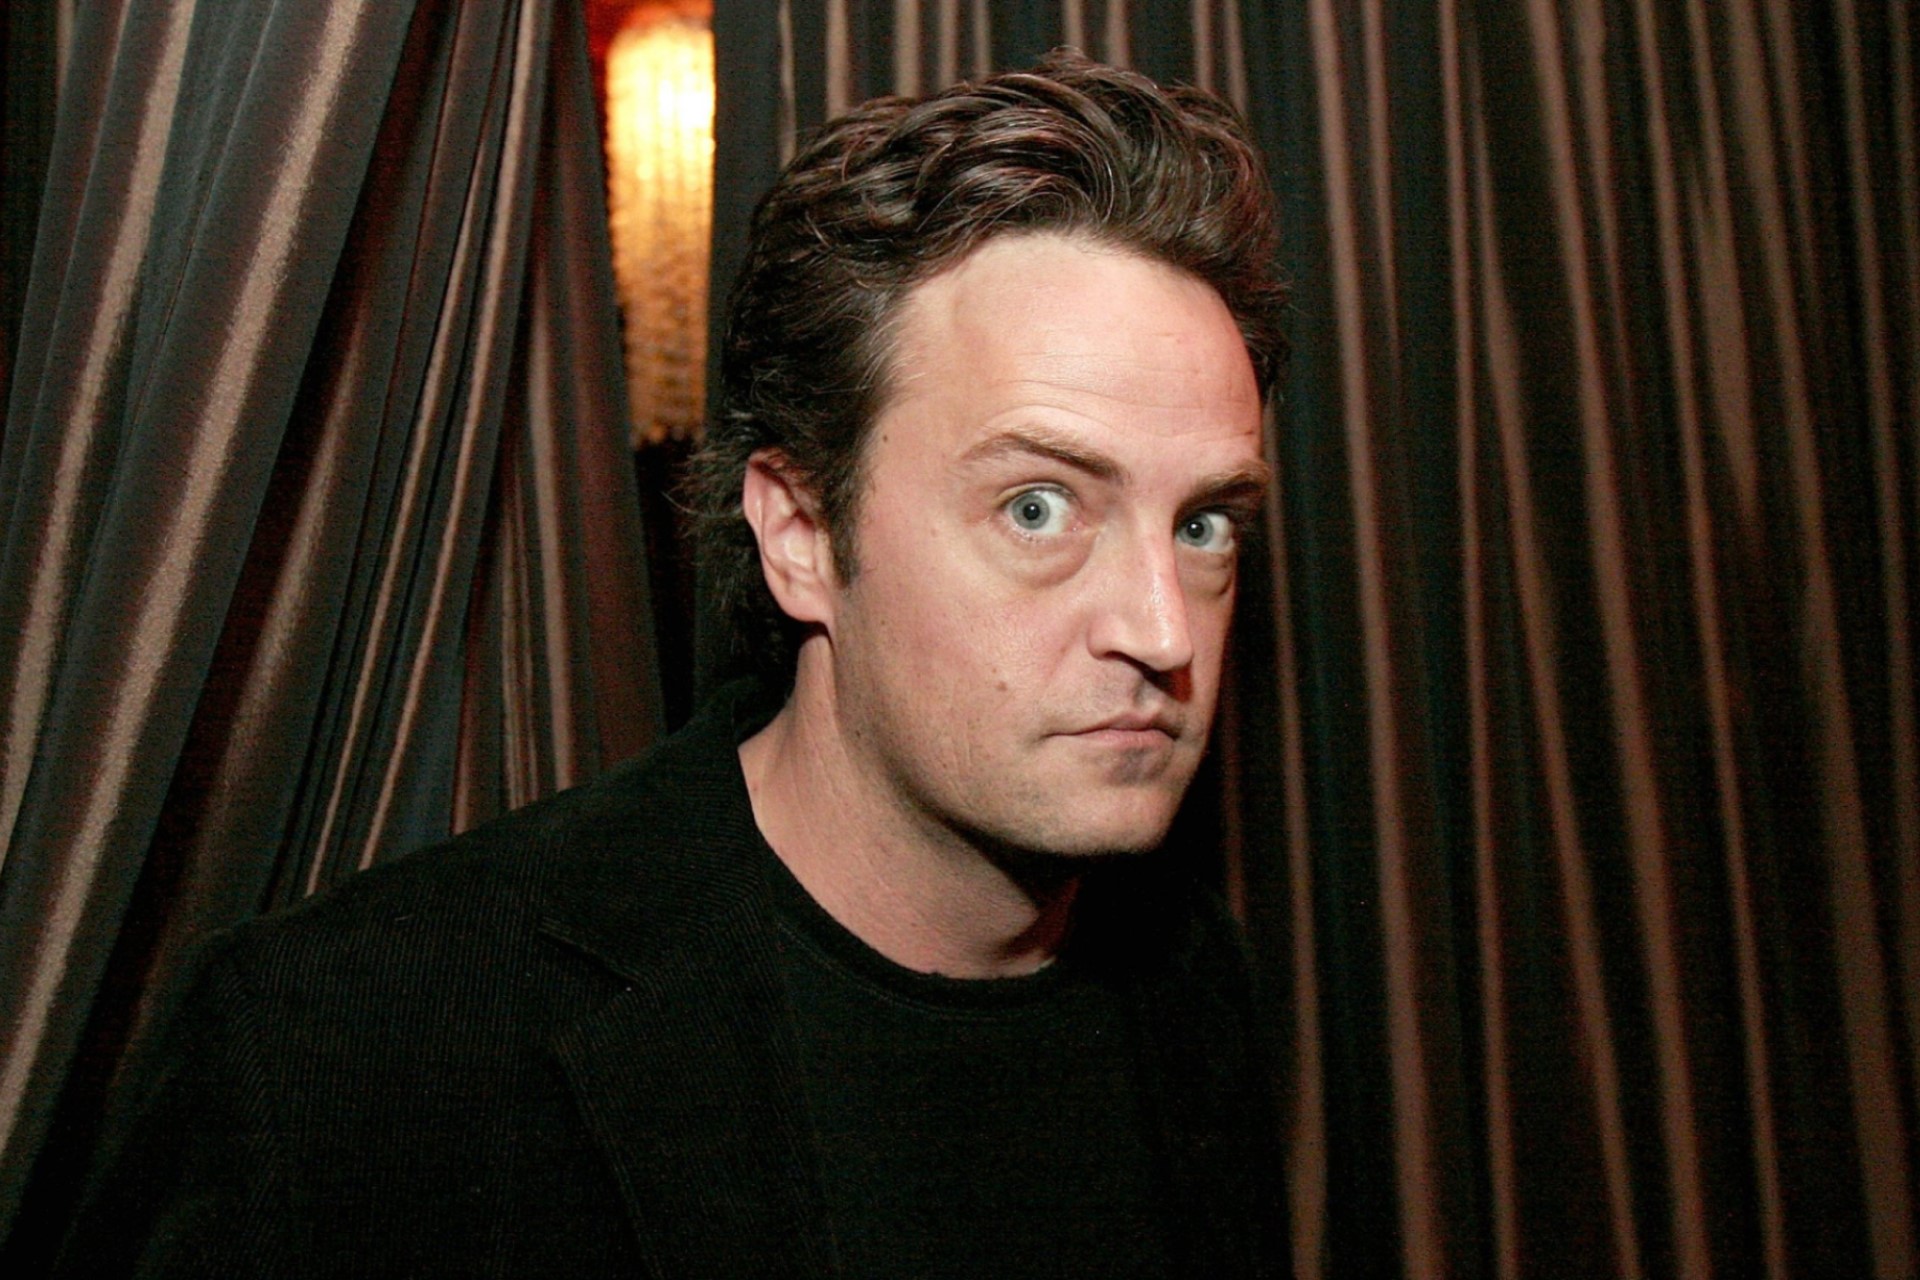 Matthew Perry died at age 54